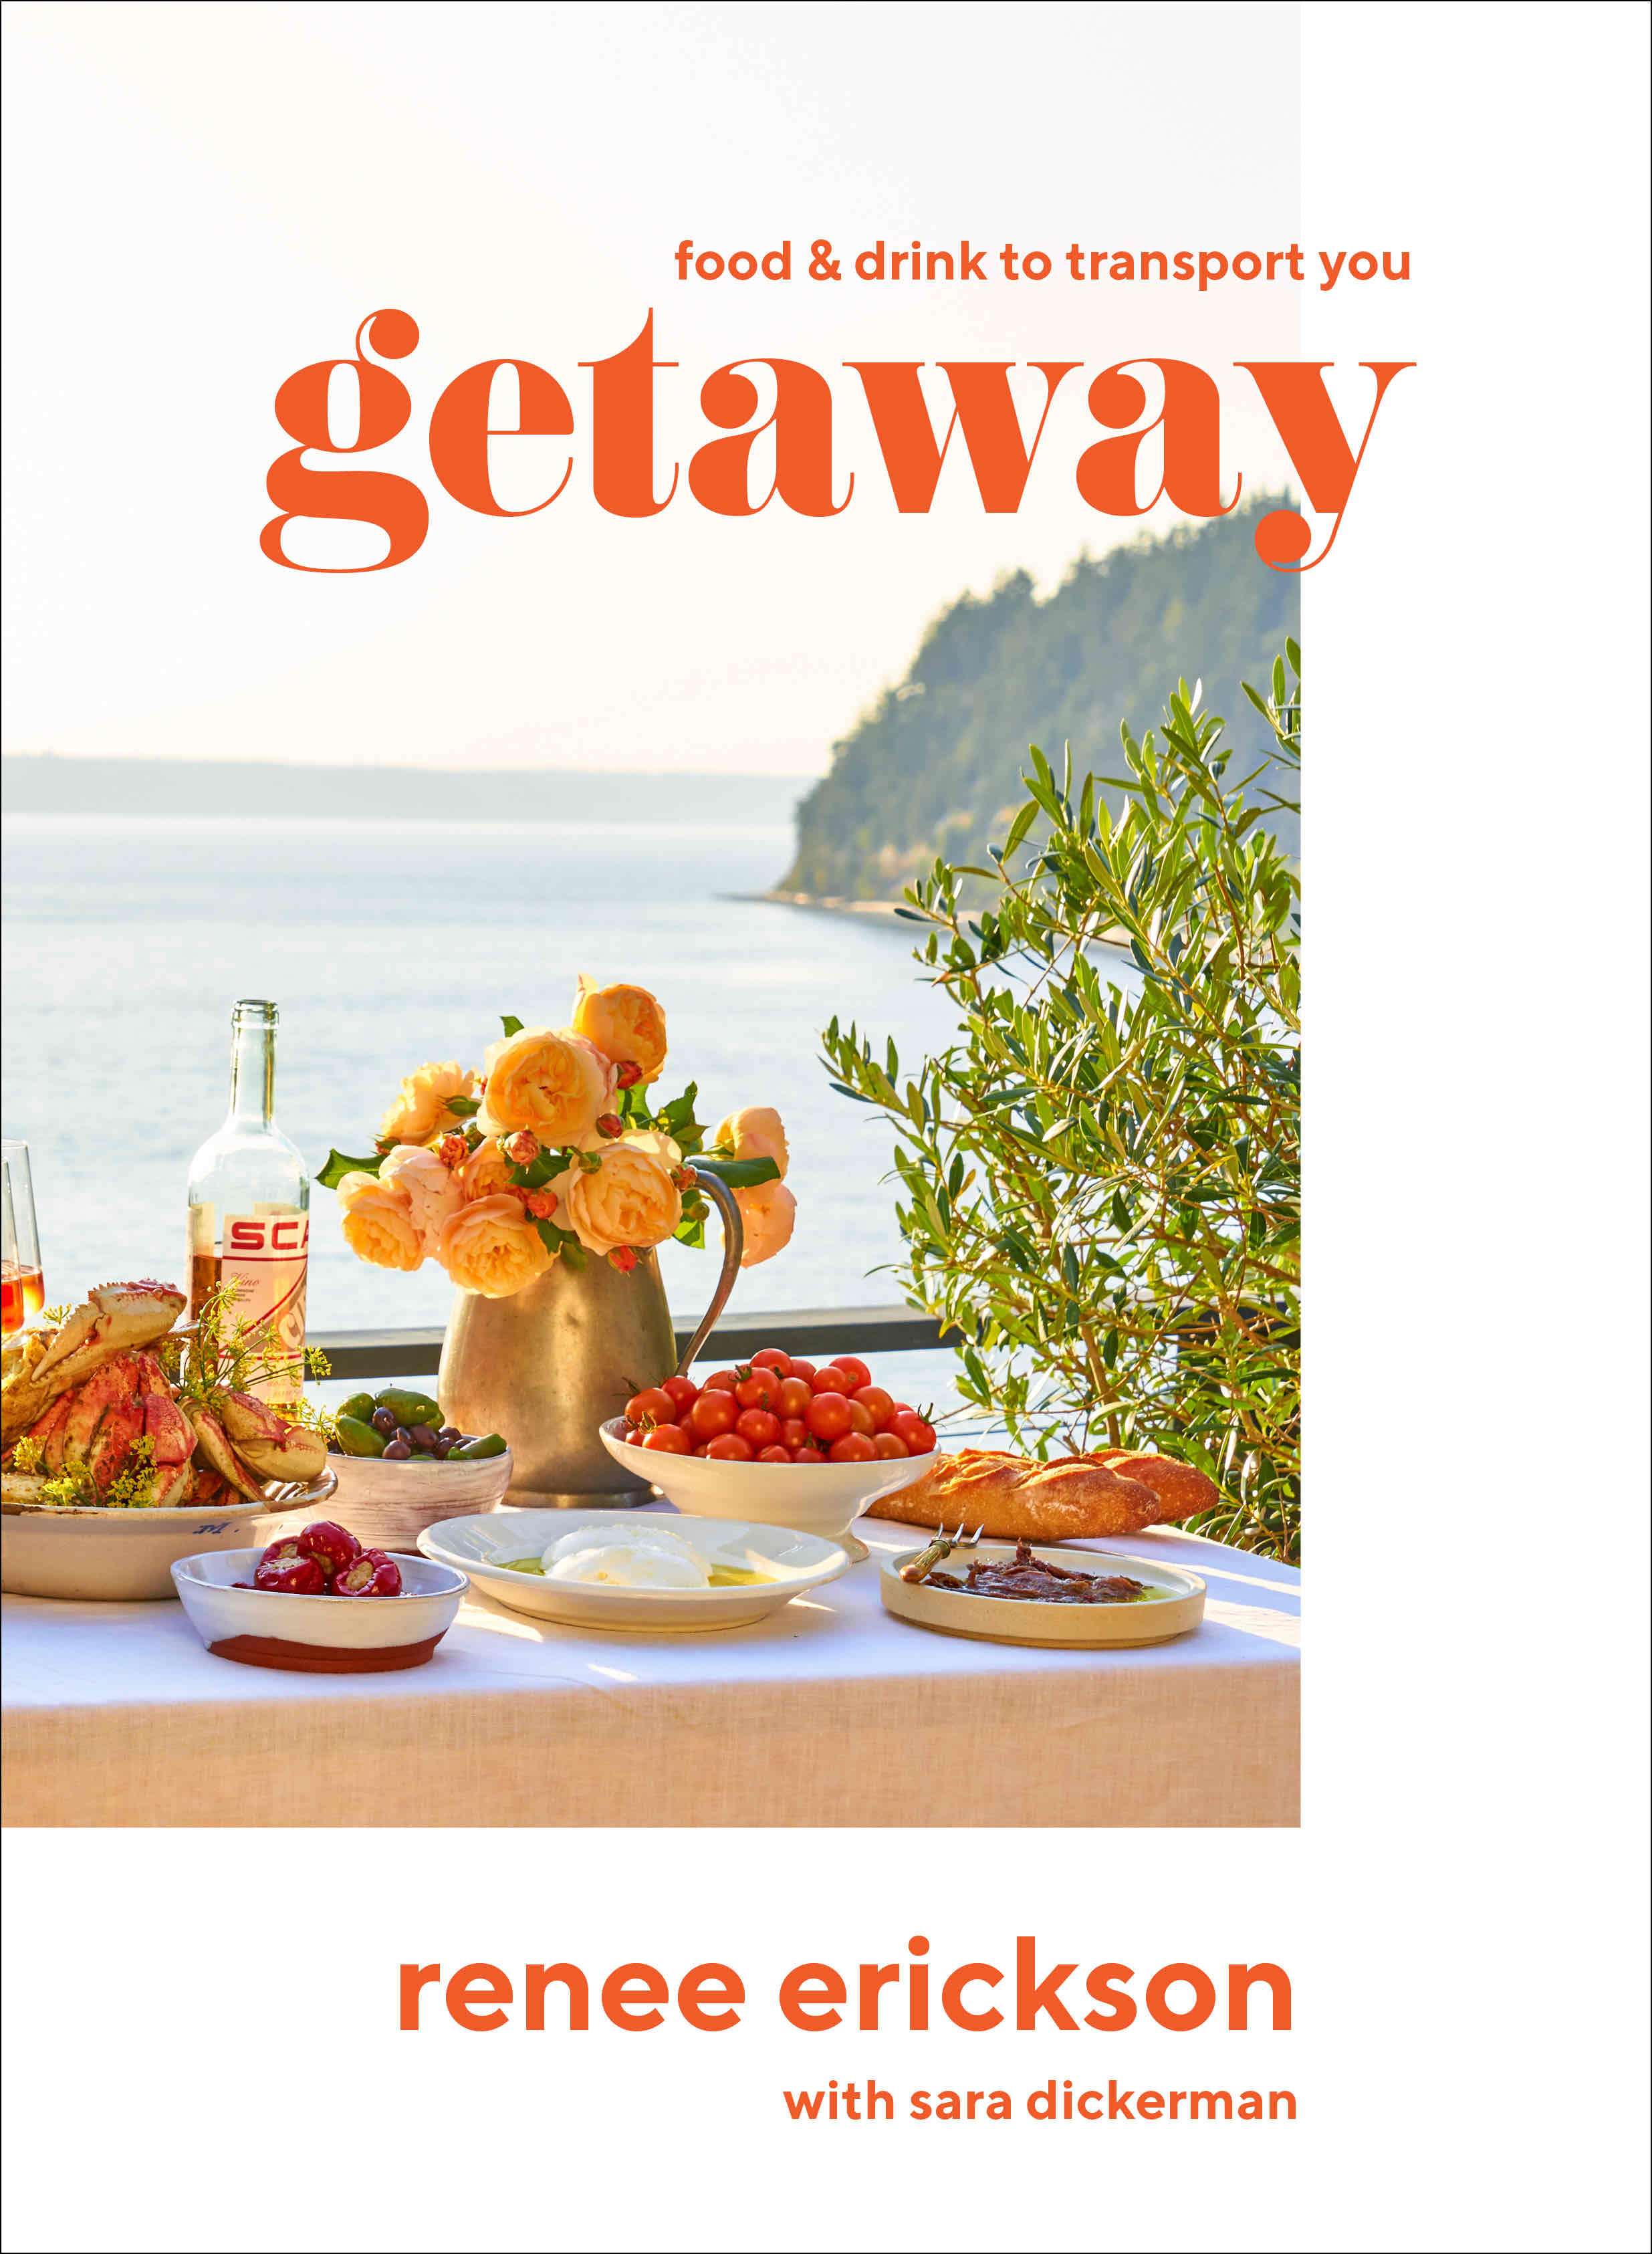 Virtual event with Renee Erickson/Getaway: Recipes and Drinks to Transport You